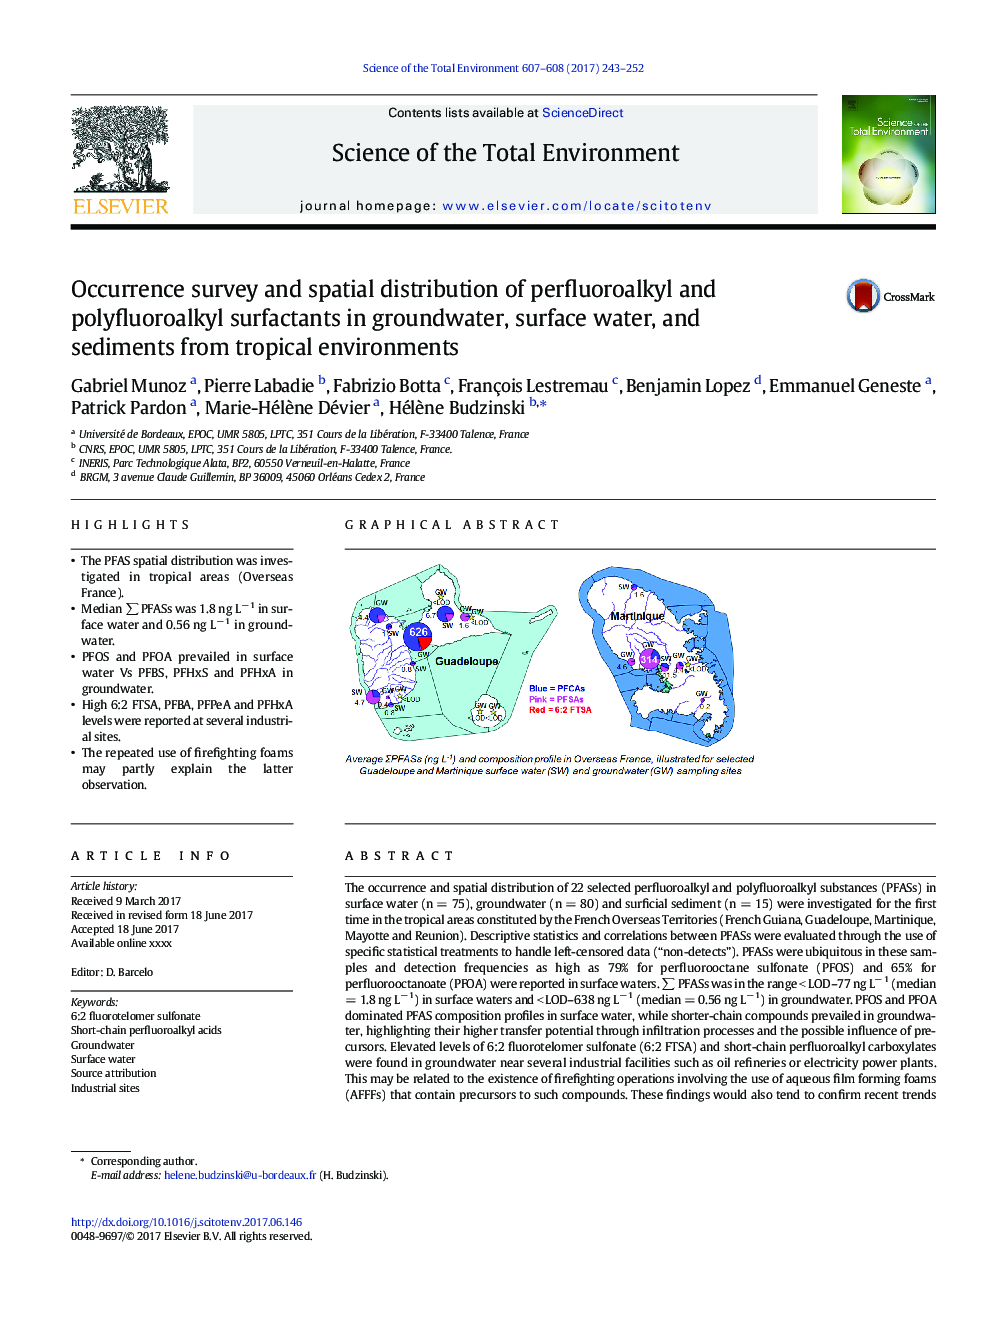 Occurrence survey and spatial distribution of perfluoroalkyl and polyfluoroalkyl surfactants in groundwater, surface water, and sediments from tropical environments